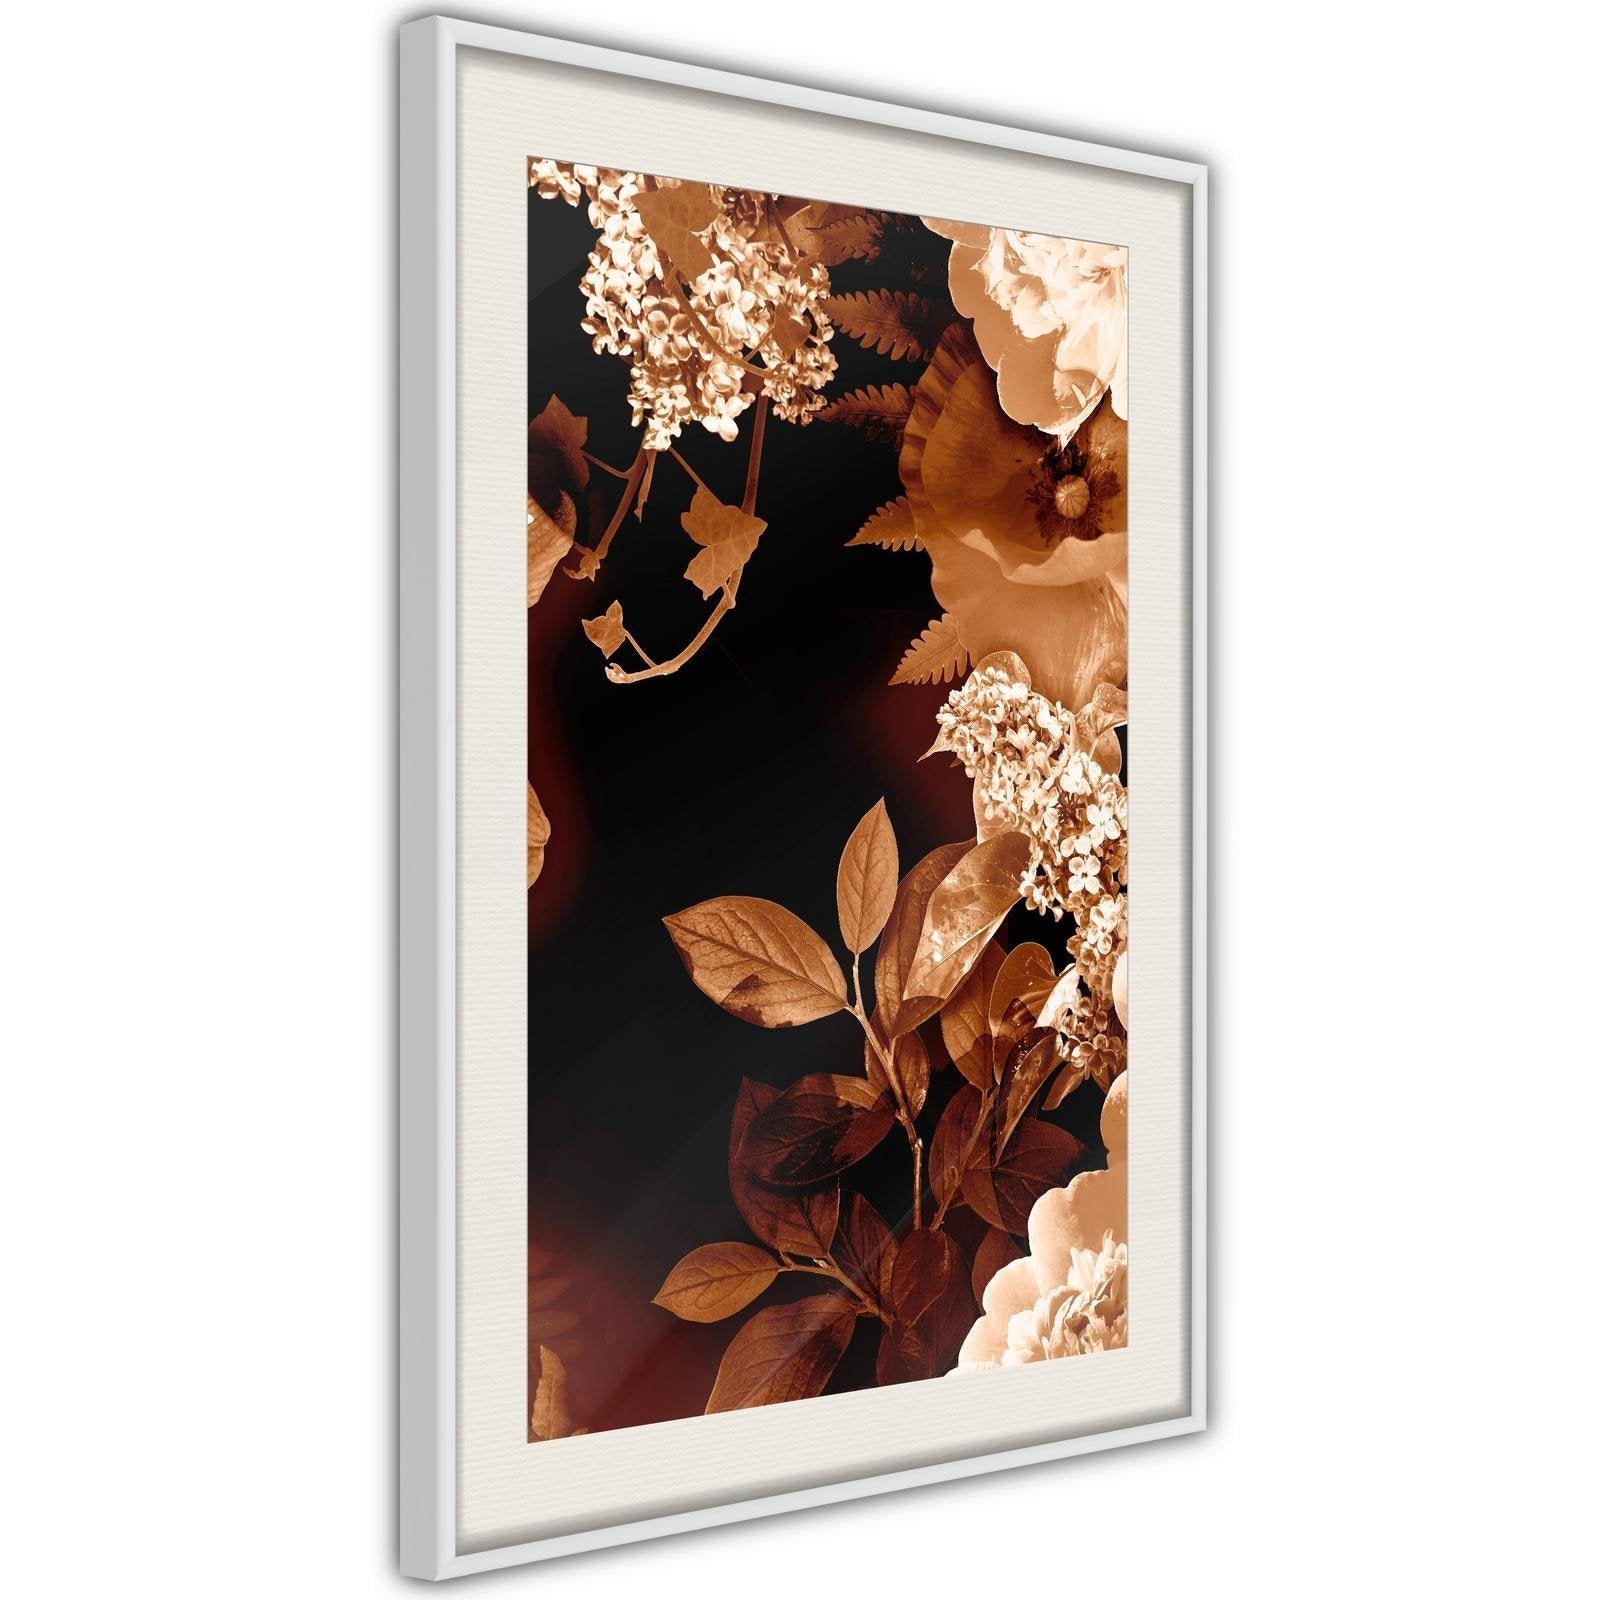 Inramad Poster / Tavla - Flower Decoration in Sepia-Poster Inramad-Artgeist-peaceofhome.se